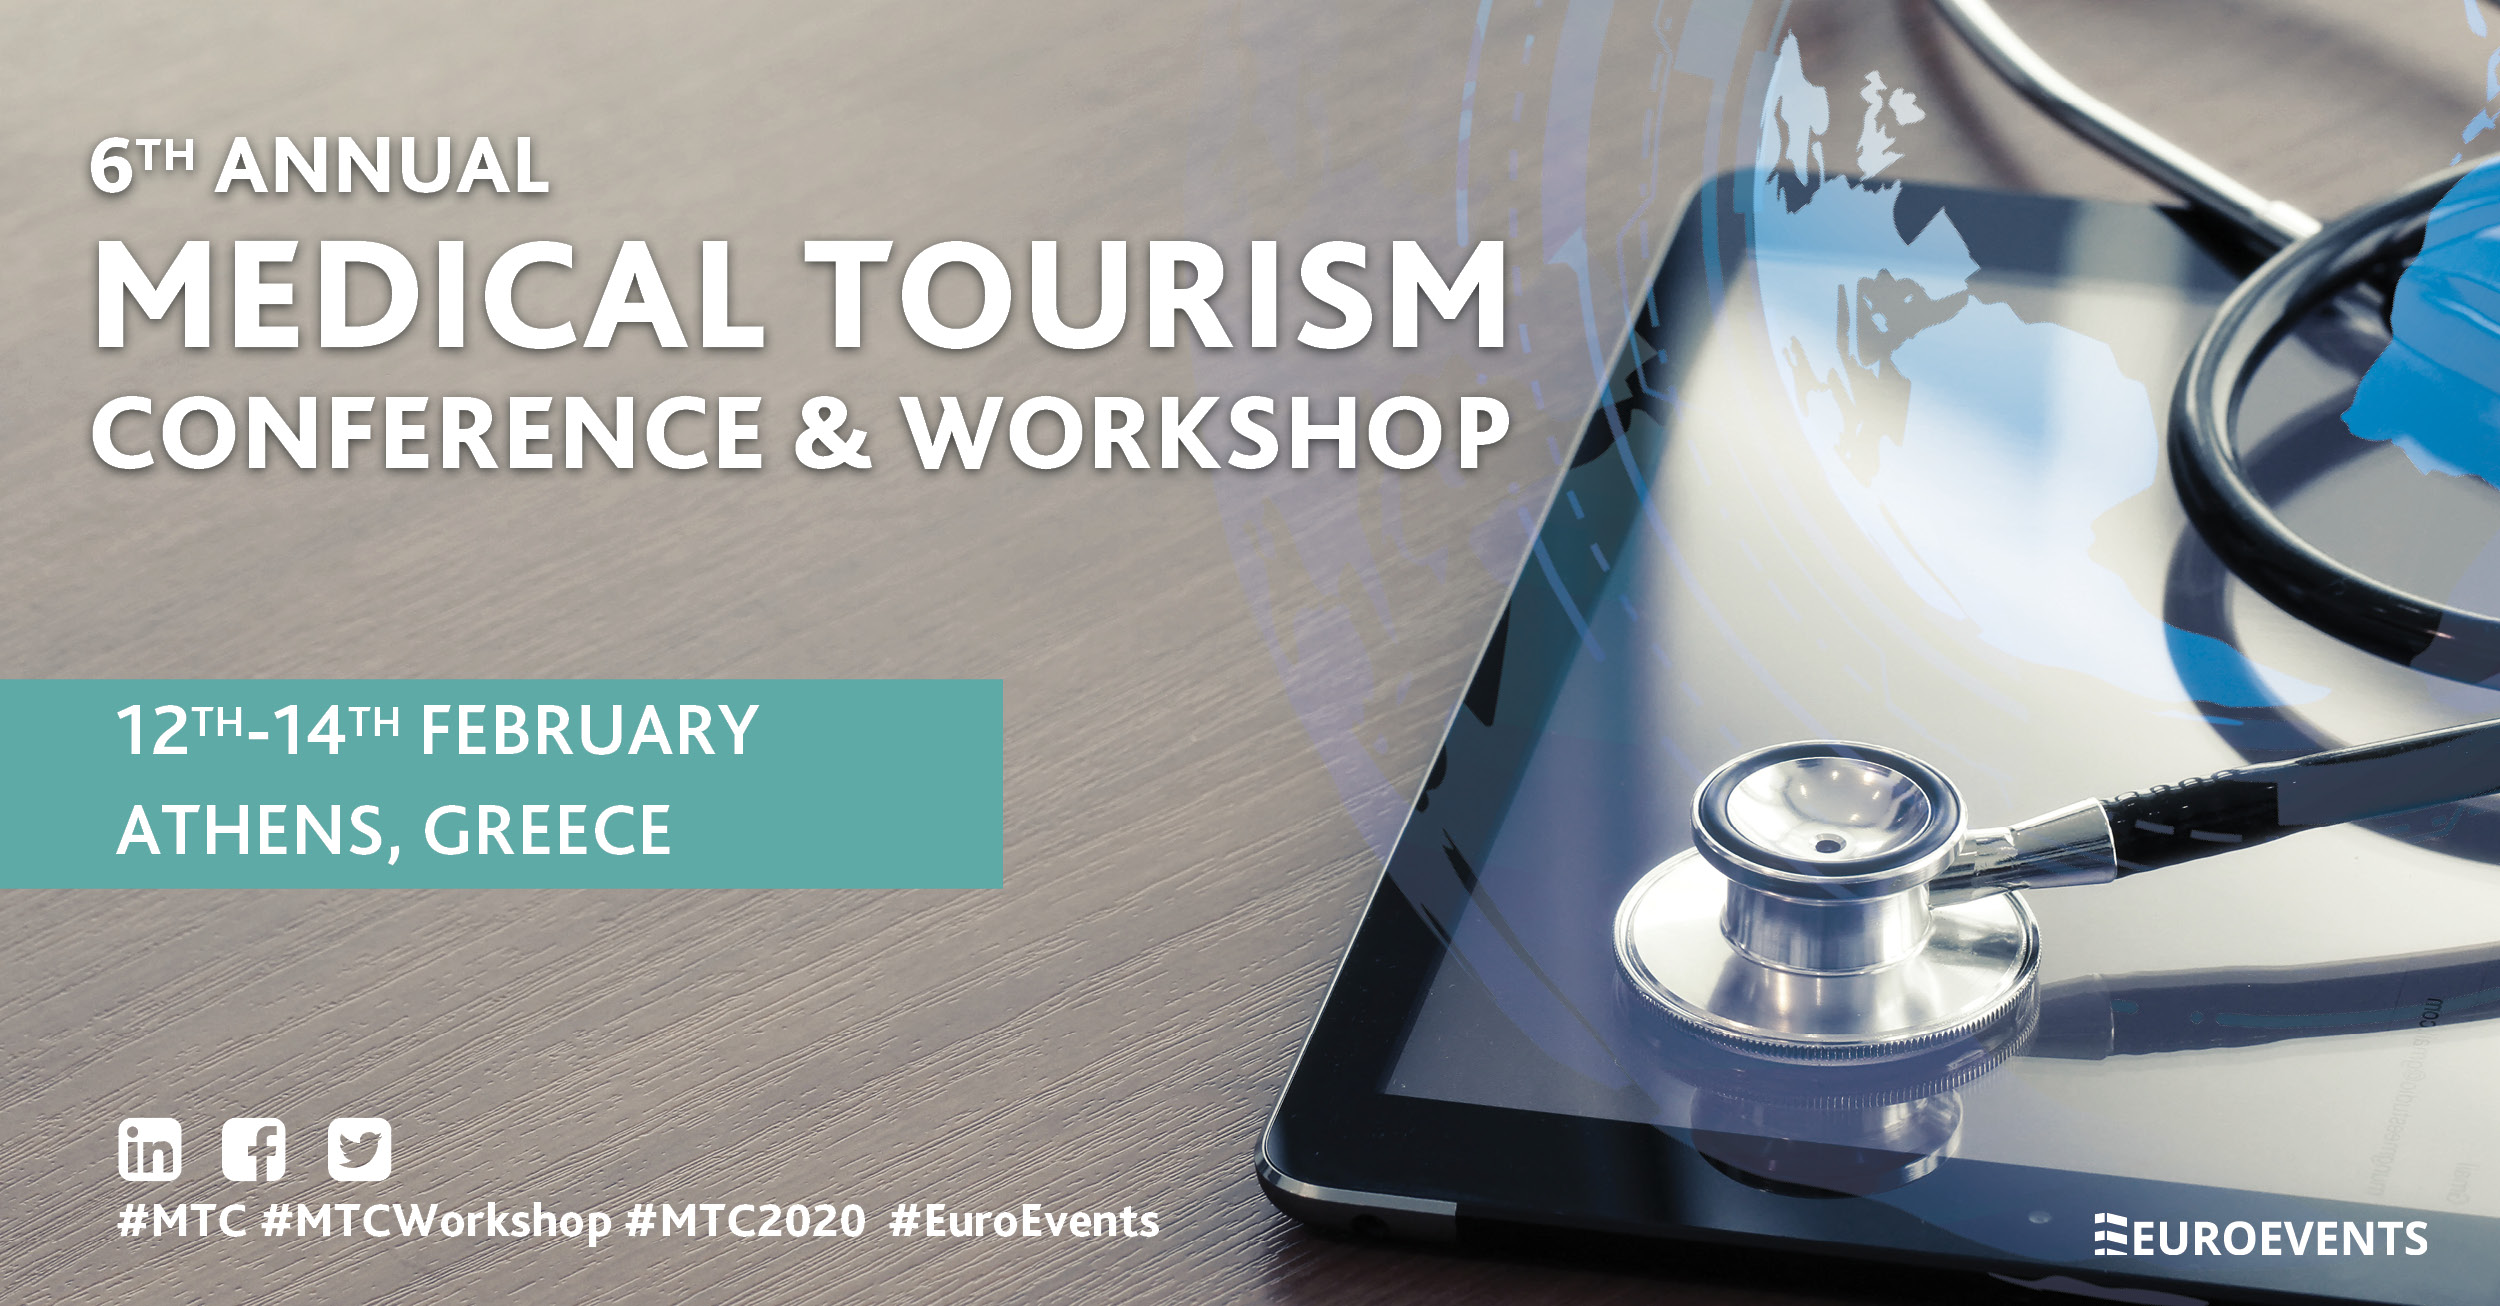 6TH ANNUAL MEDICAL TOURISM Conference & Workshop, Athens, Attica, Greece